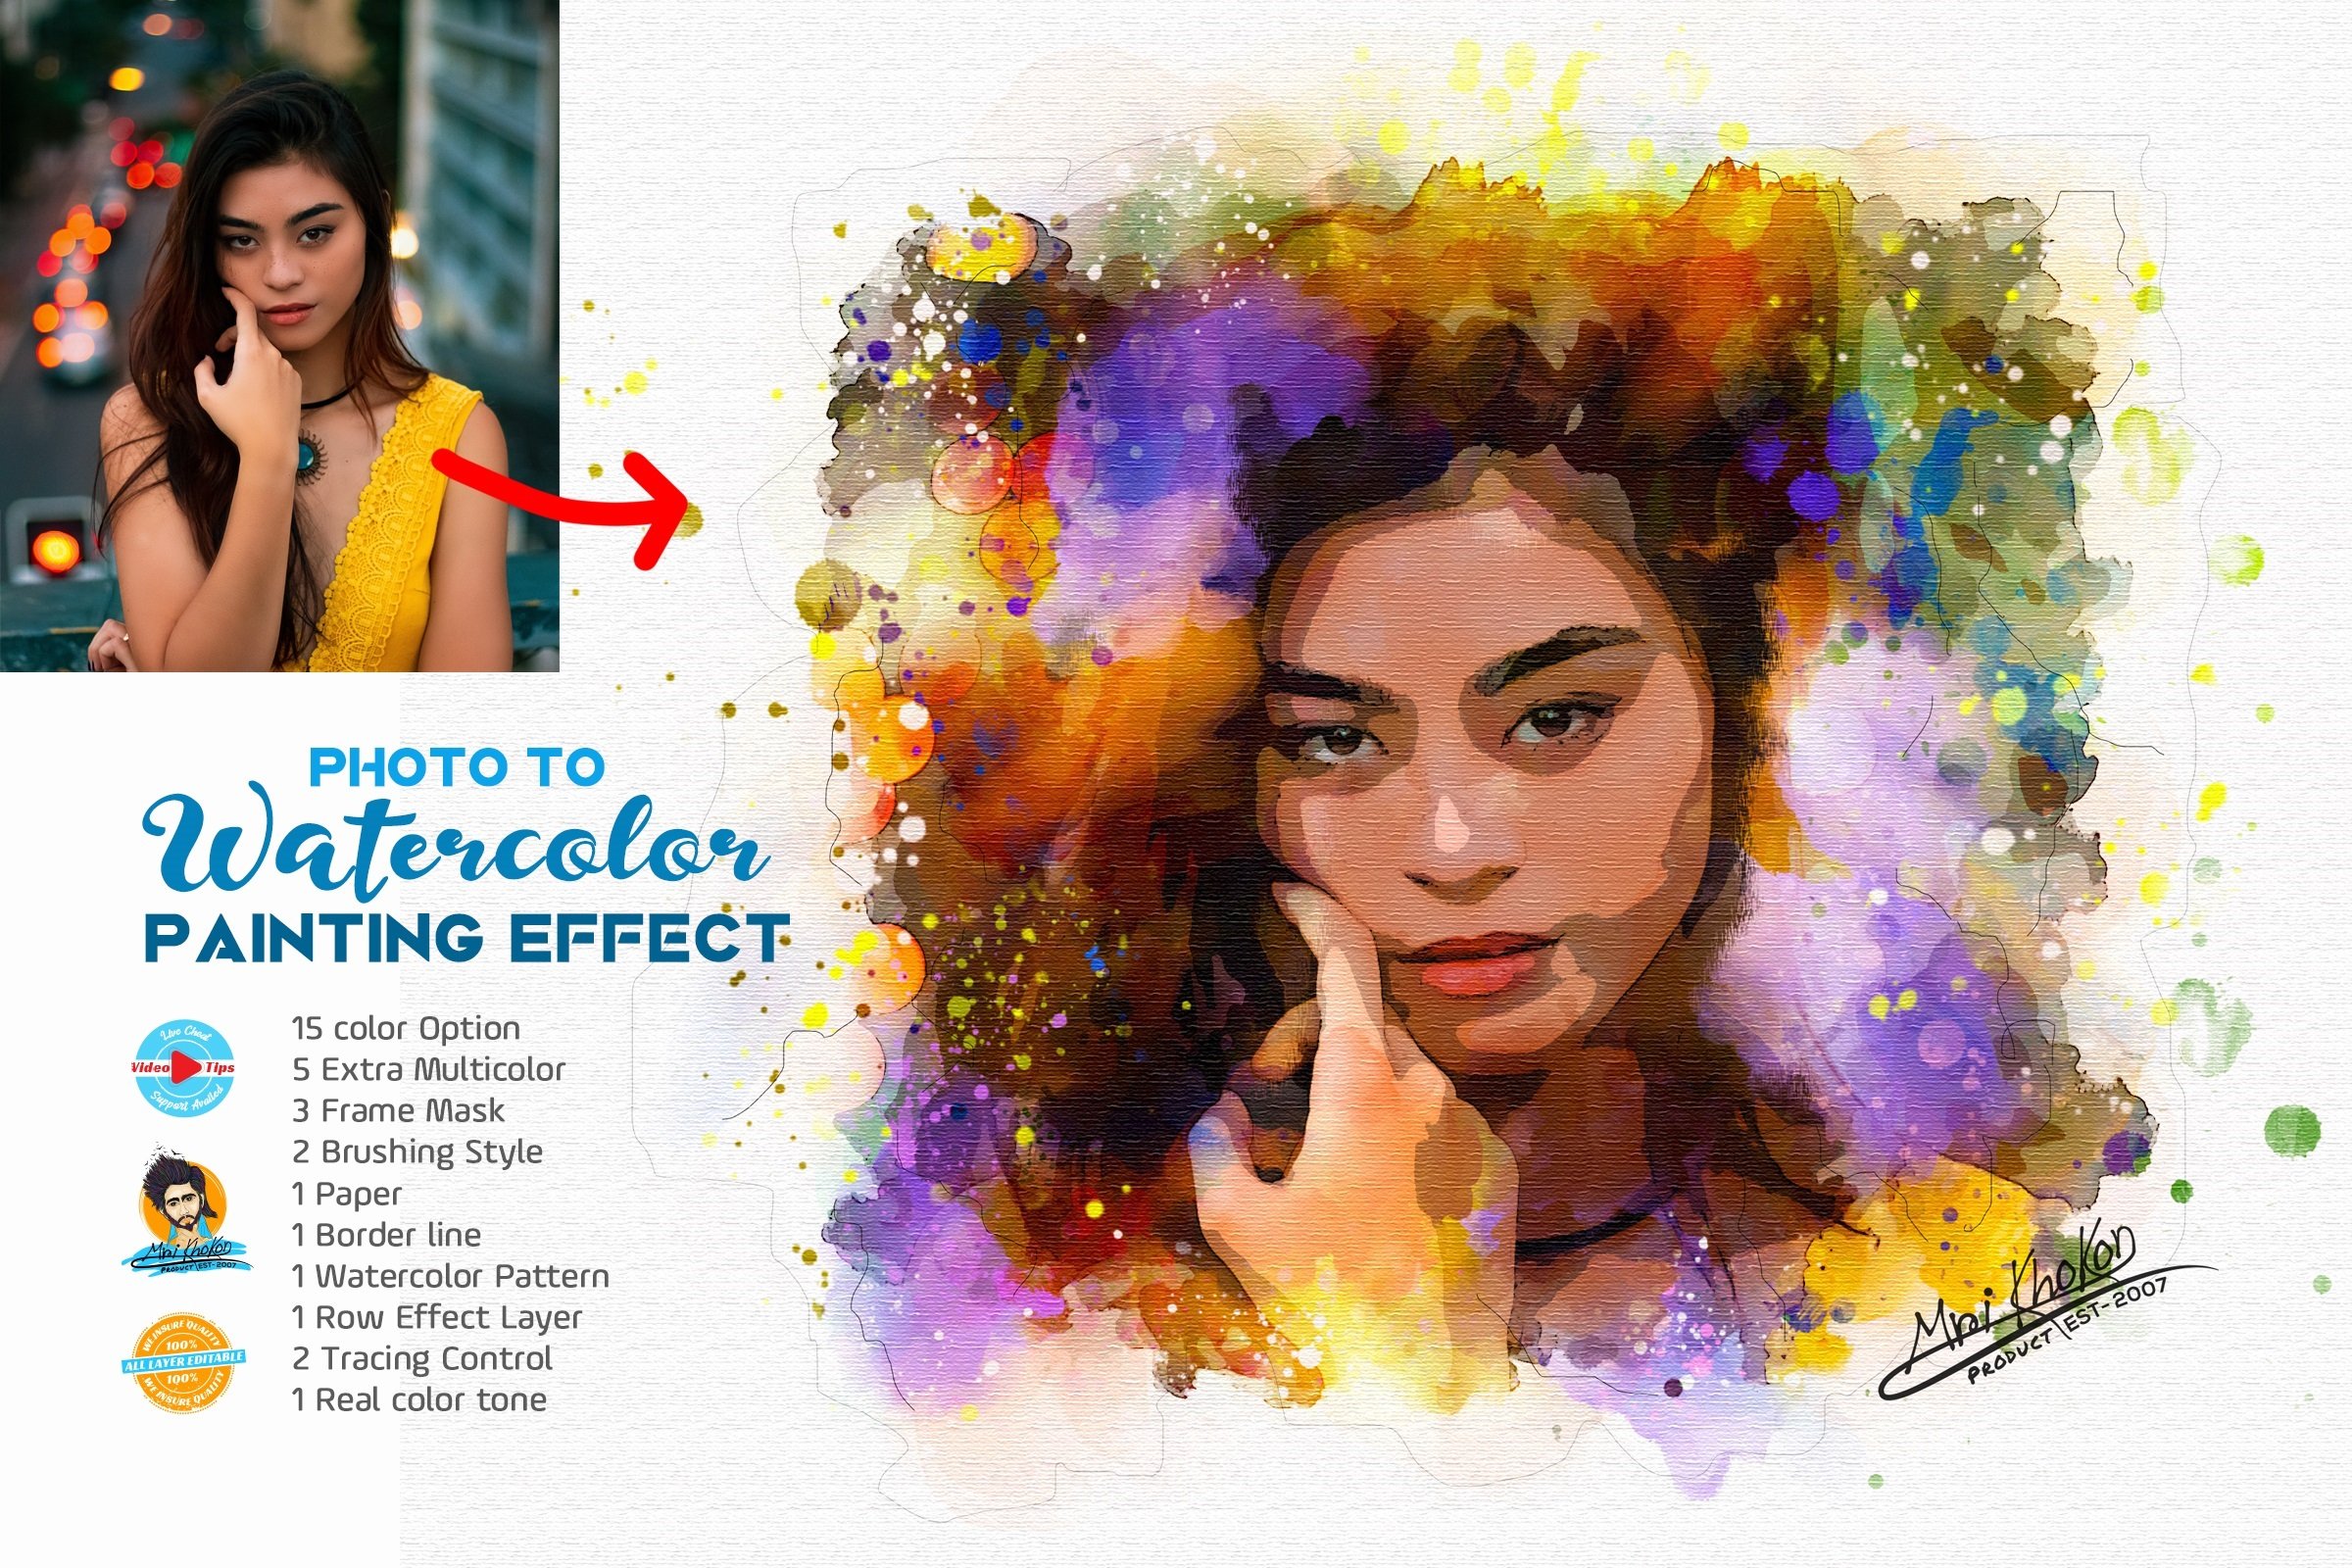 Photo to Watercolor Painting Effectcover image.